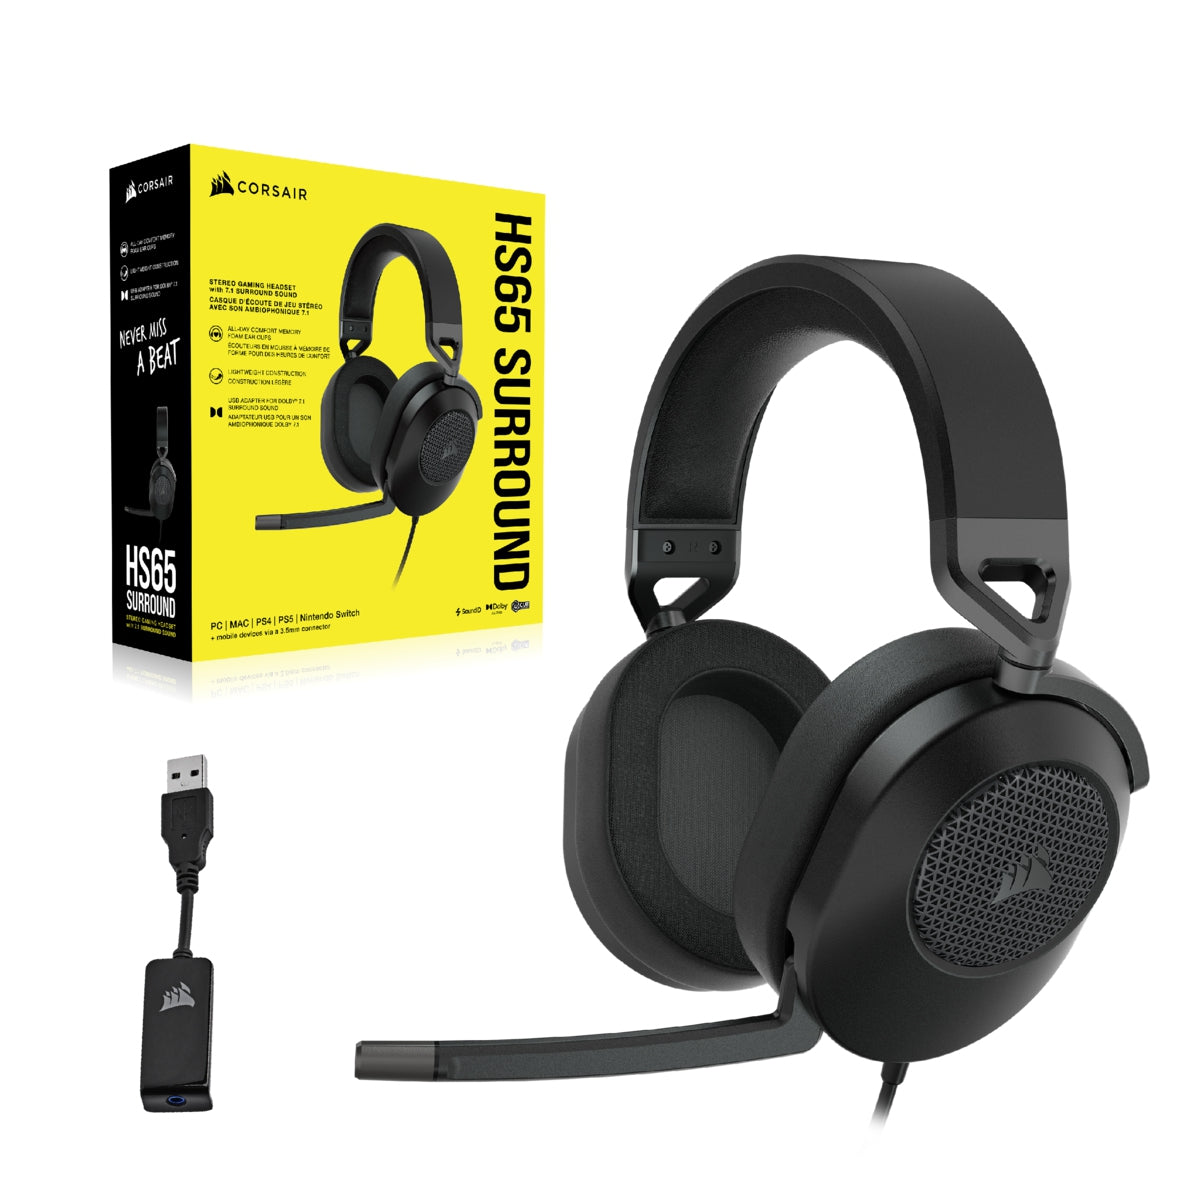 Headset Corsair Hs65 Surround Wired Carbon Ca-9011270-Na